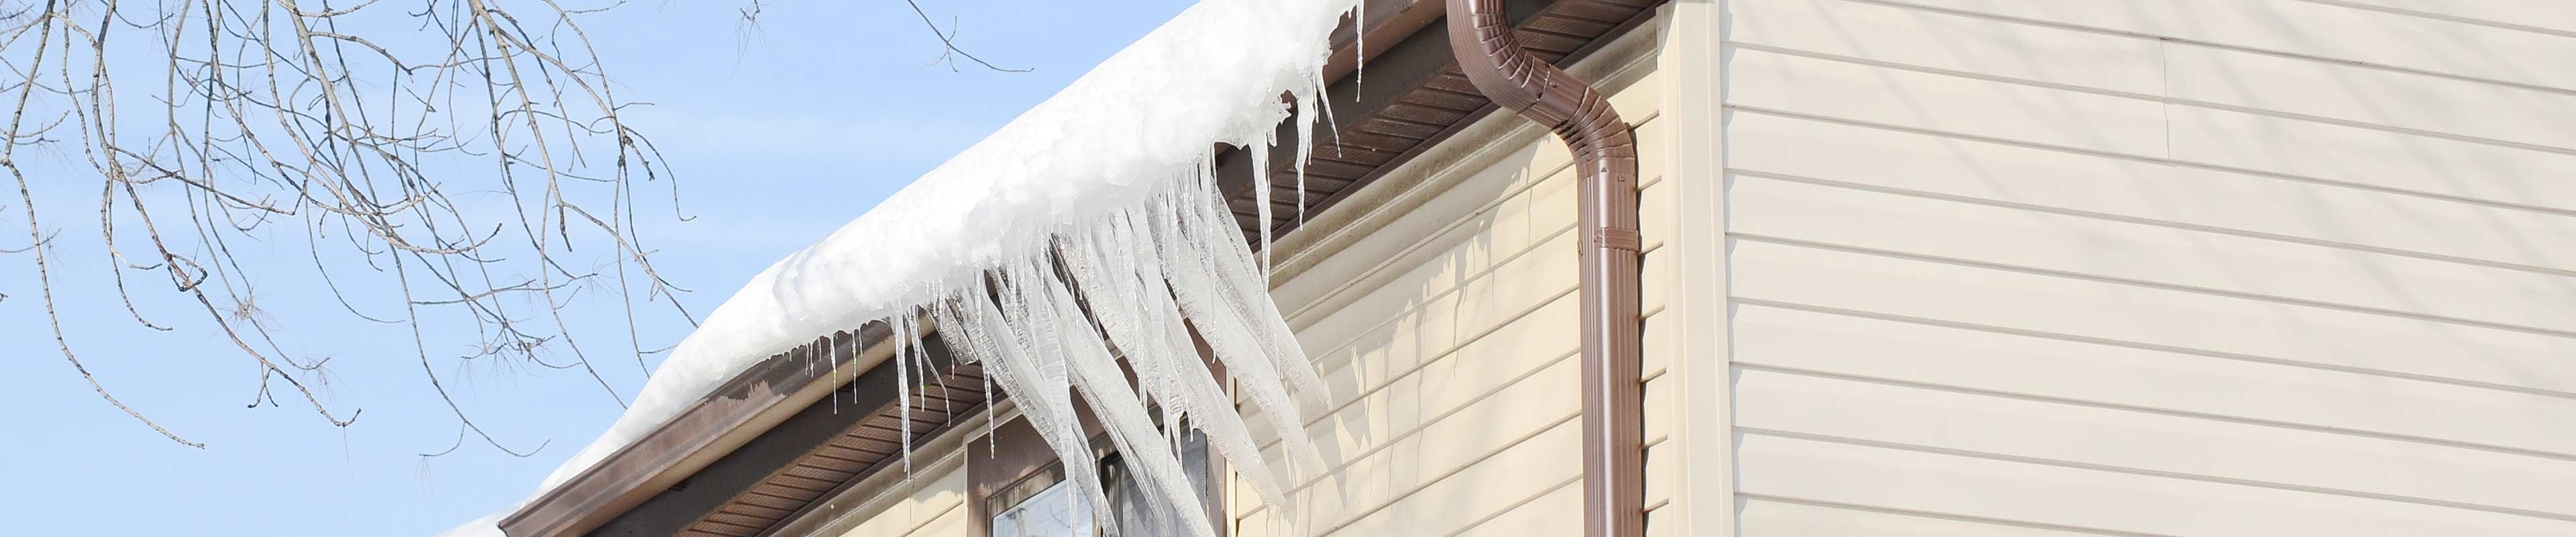 Image of a home with ice dams and icicles.